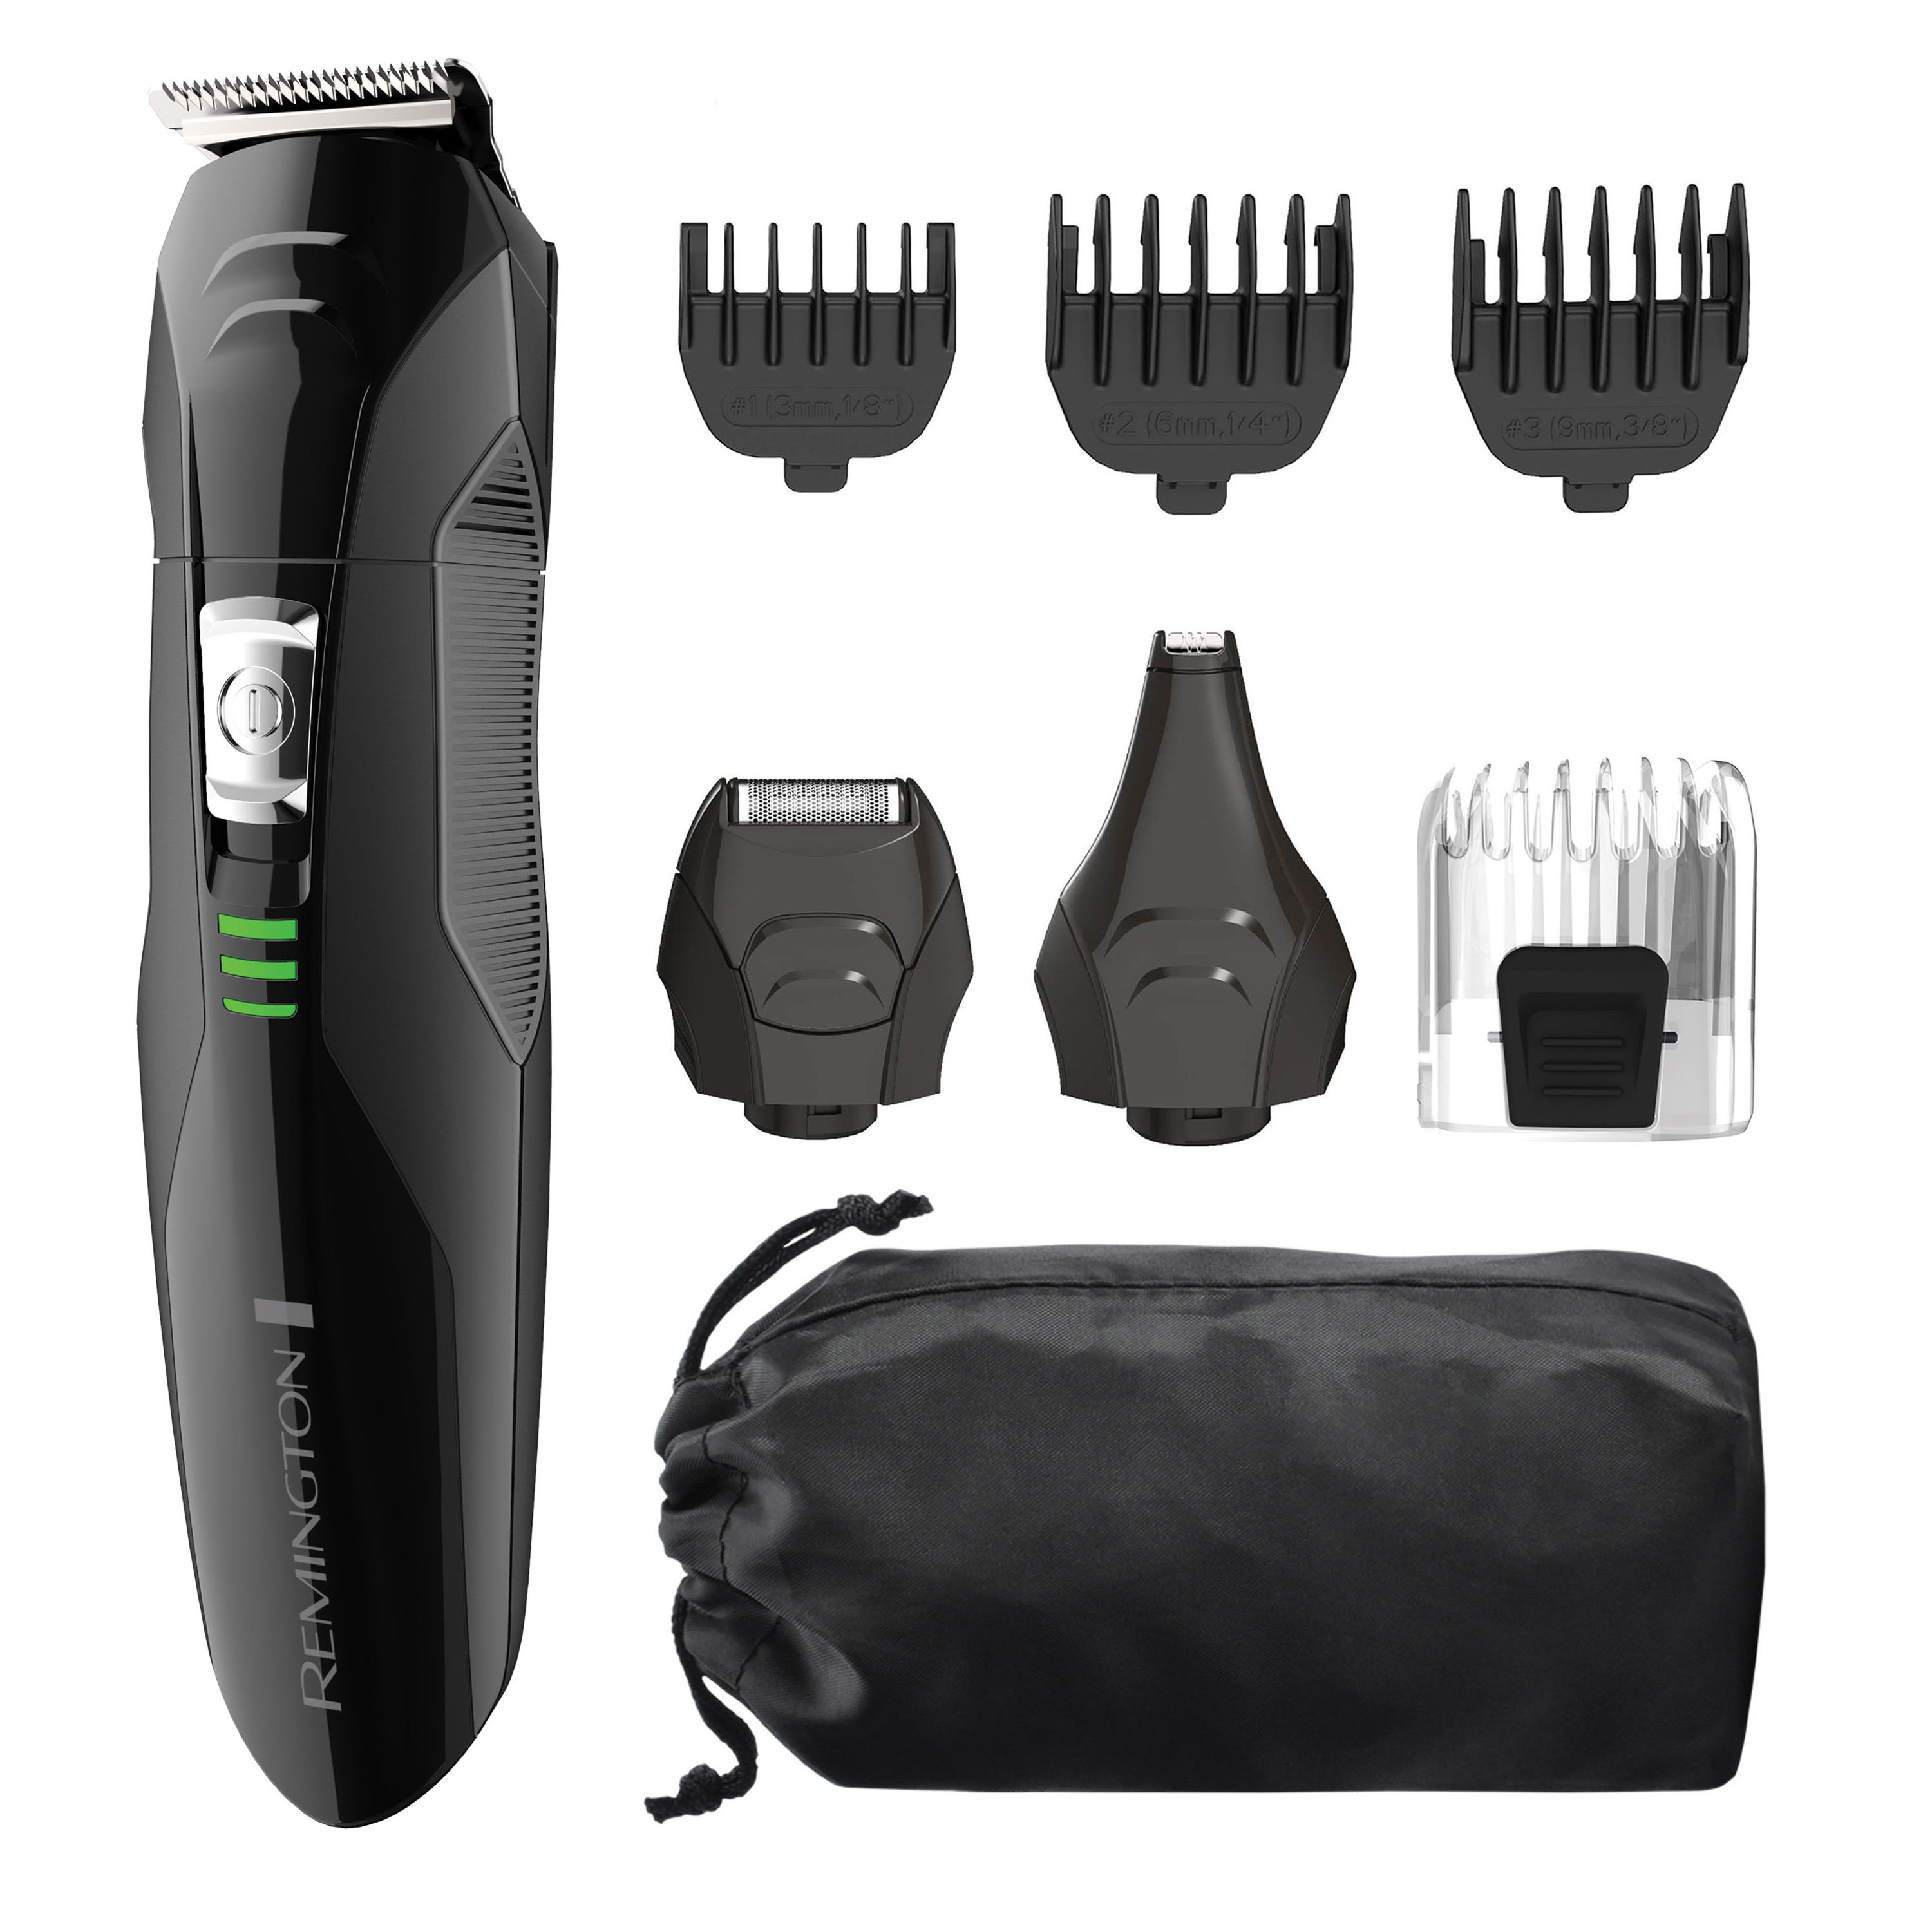 Remington All-In-One Grooming Kit, Black, PG6025 - image 1 of 3